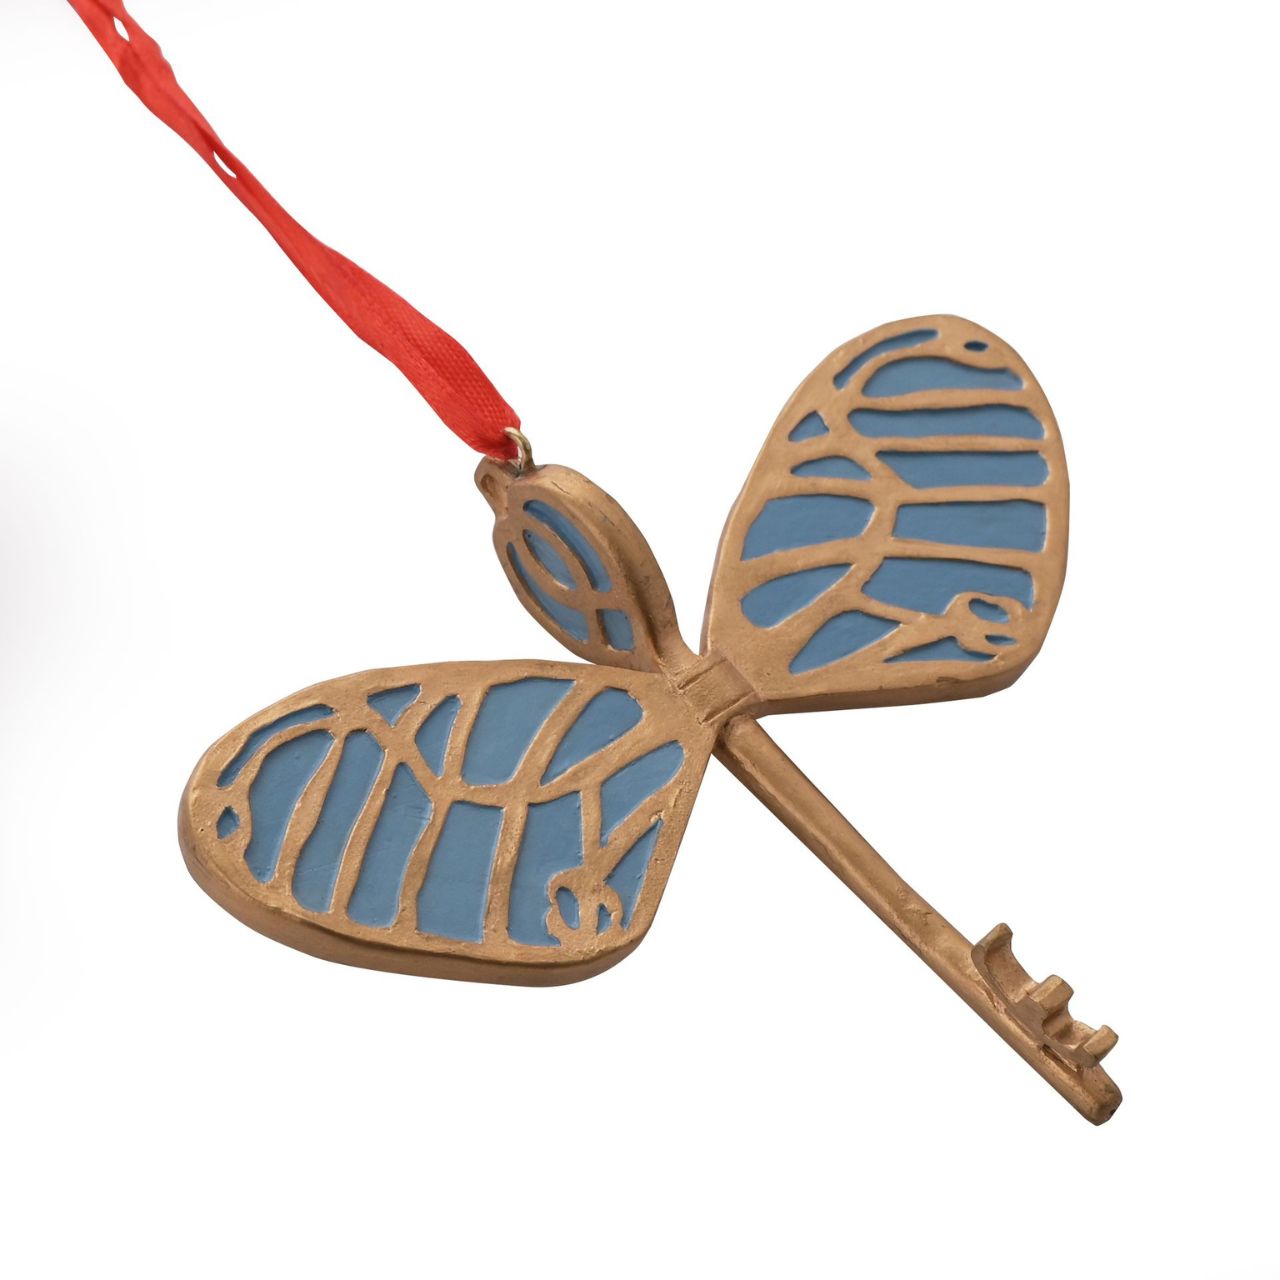 Harry Potter Resin Tree Decoration - Owl, Letter & Key  These ornaments would make a delightfully magical Christmas decoration option this festive season. With a letter, an owl, and a key, this set would look wonderful hanging on any potterhead's tree.